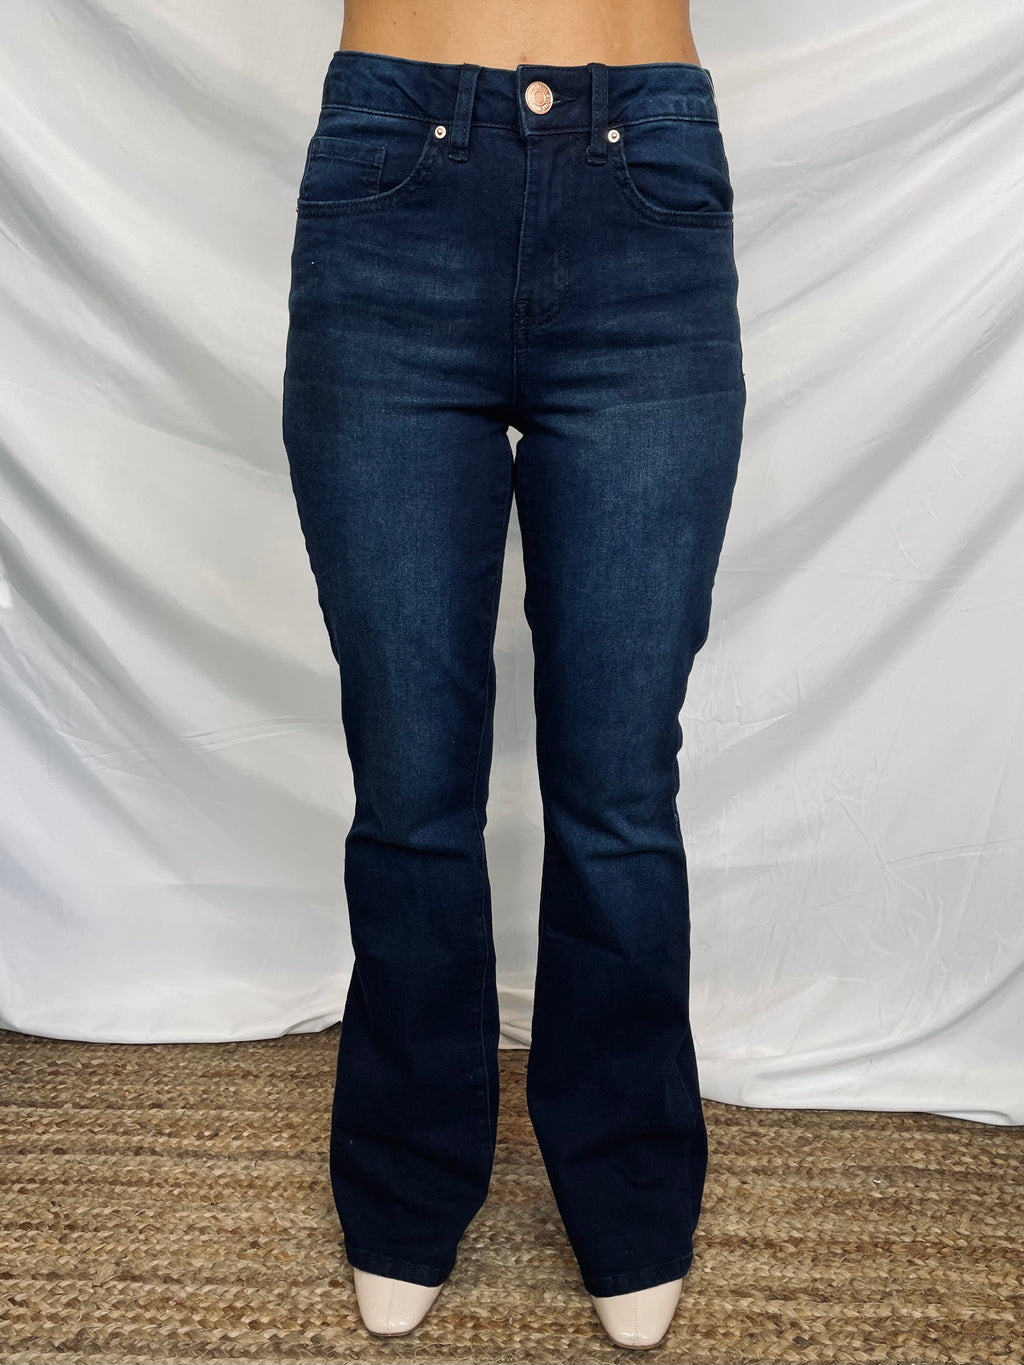 Jeans feature non distressed look. dark wash denim, 32 " inseam, flare bottoms, belt loops, button and zipper closure and runs true to size! 